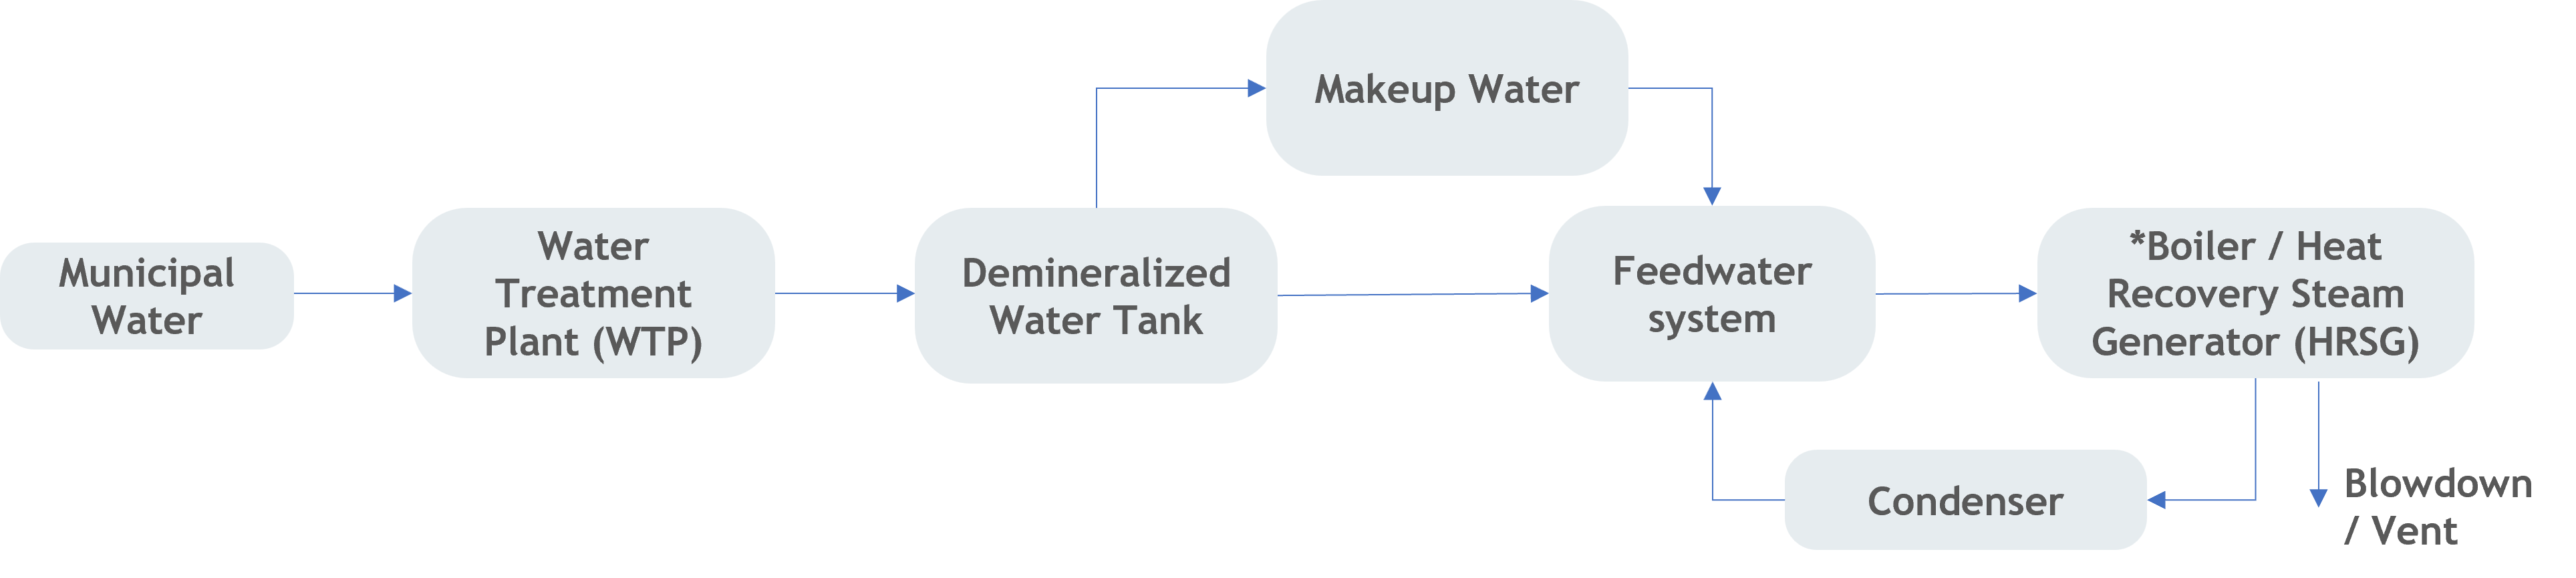 Simplified process of feedwater for steam generation